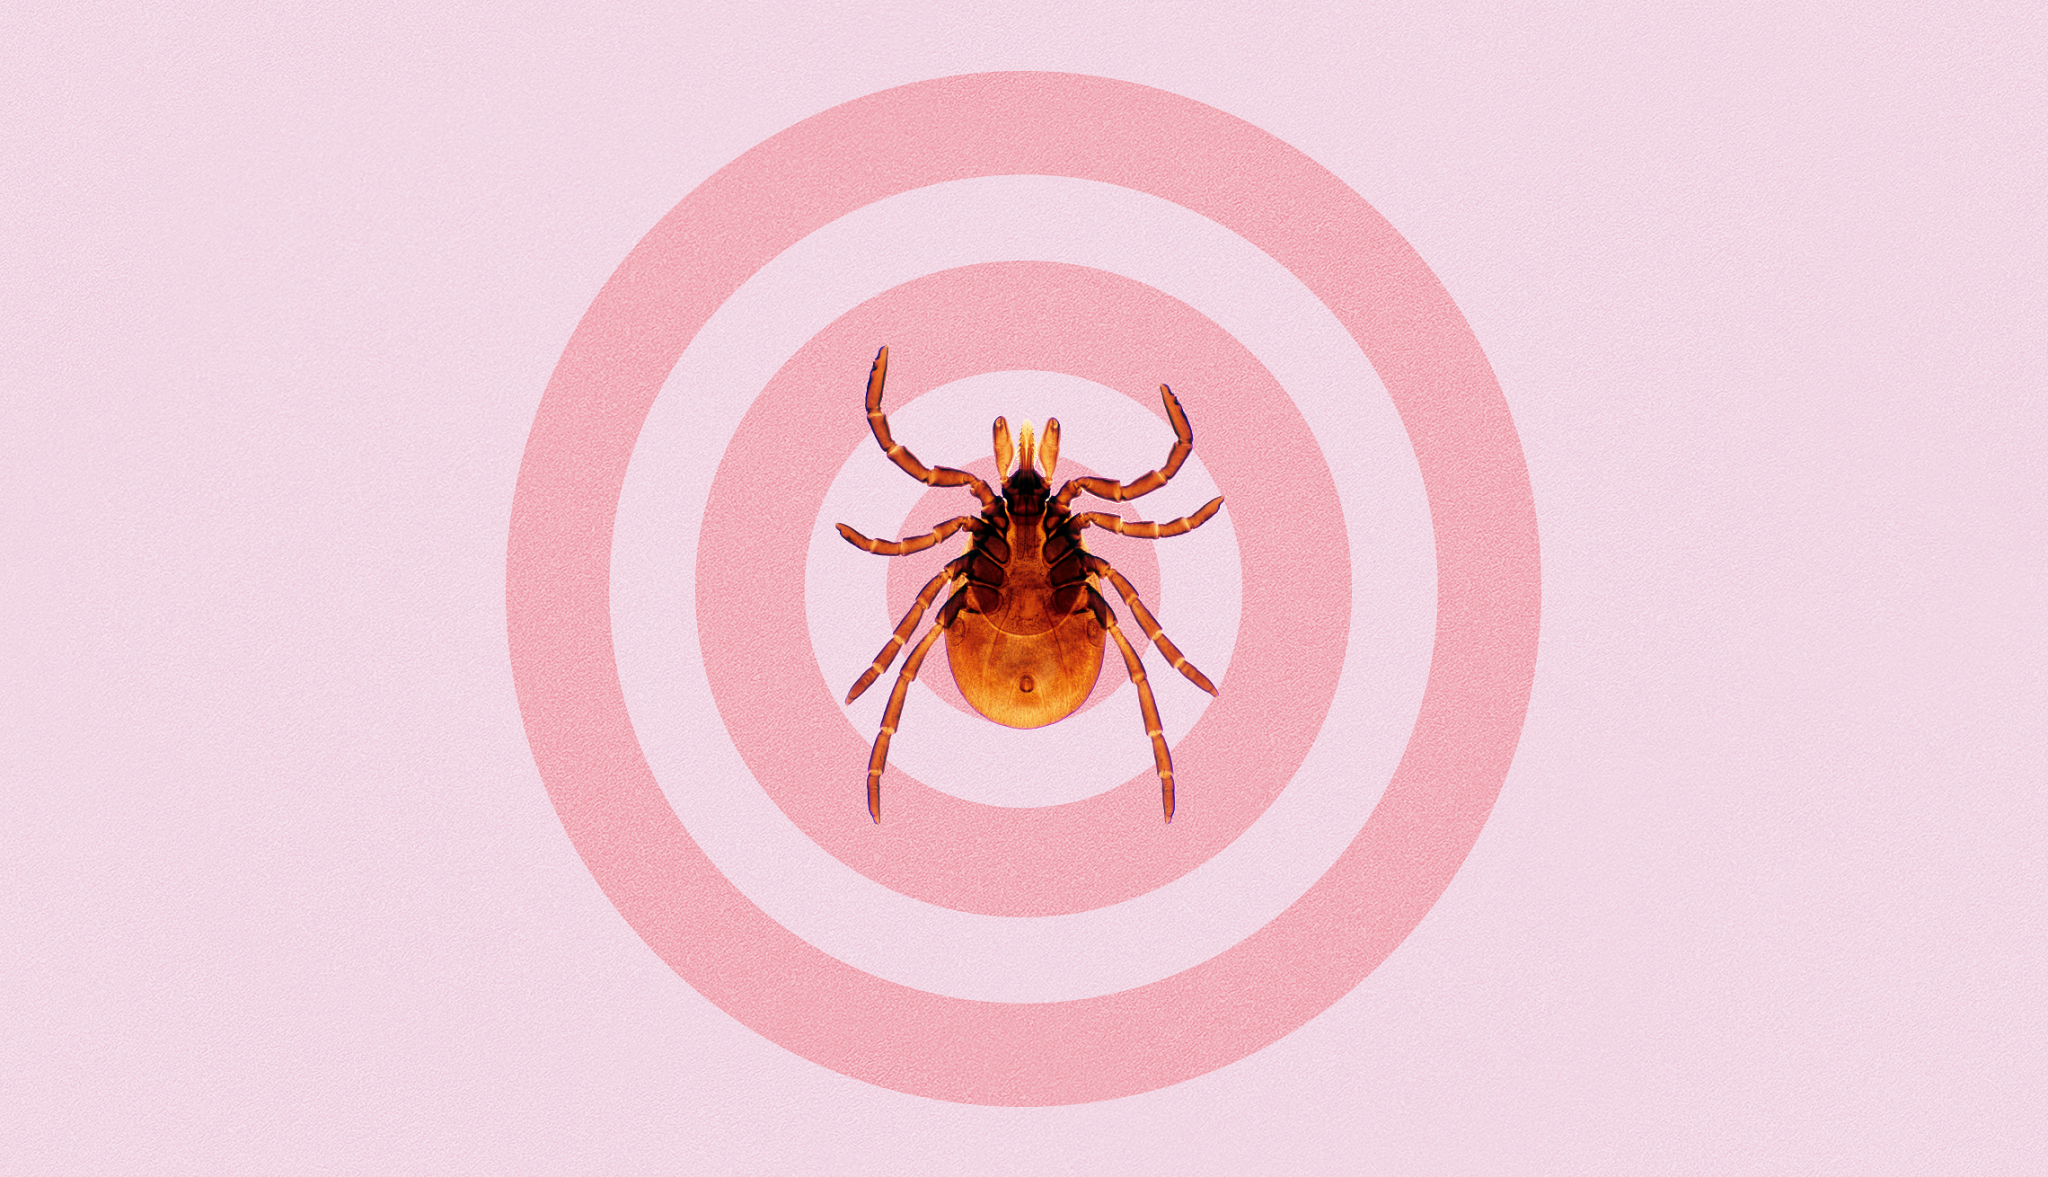 a tick on an illustration of the Lyme disease bullseye rash in shades of pink